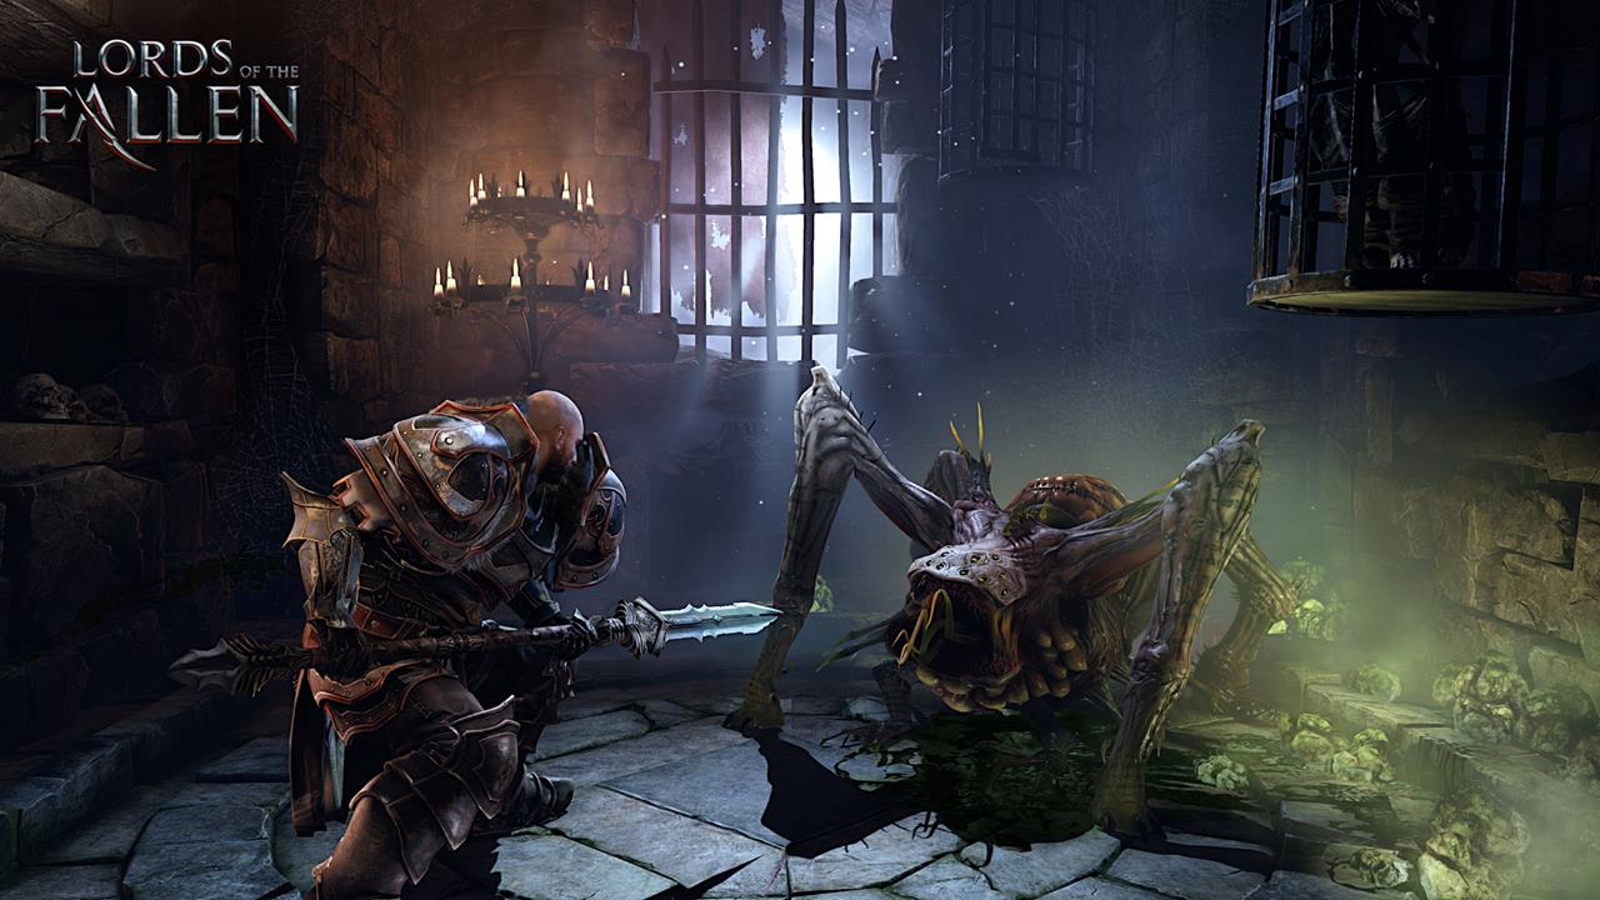 Lords of the Fallen Guide